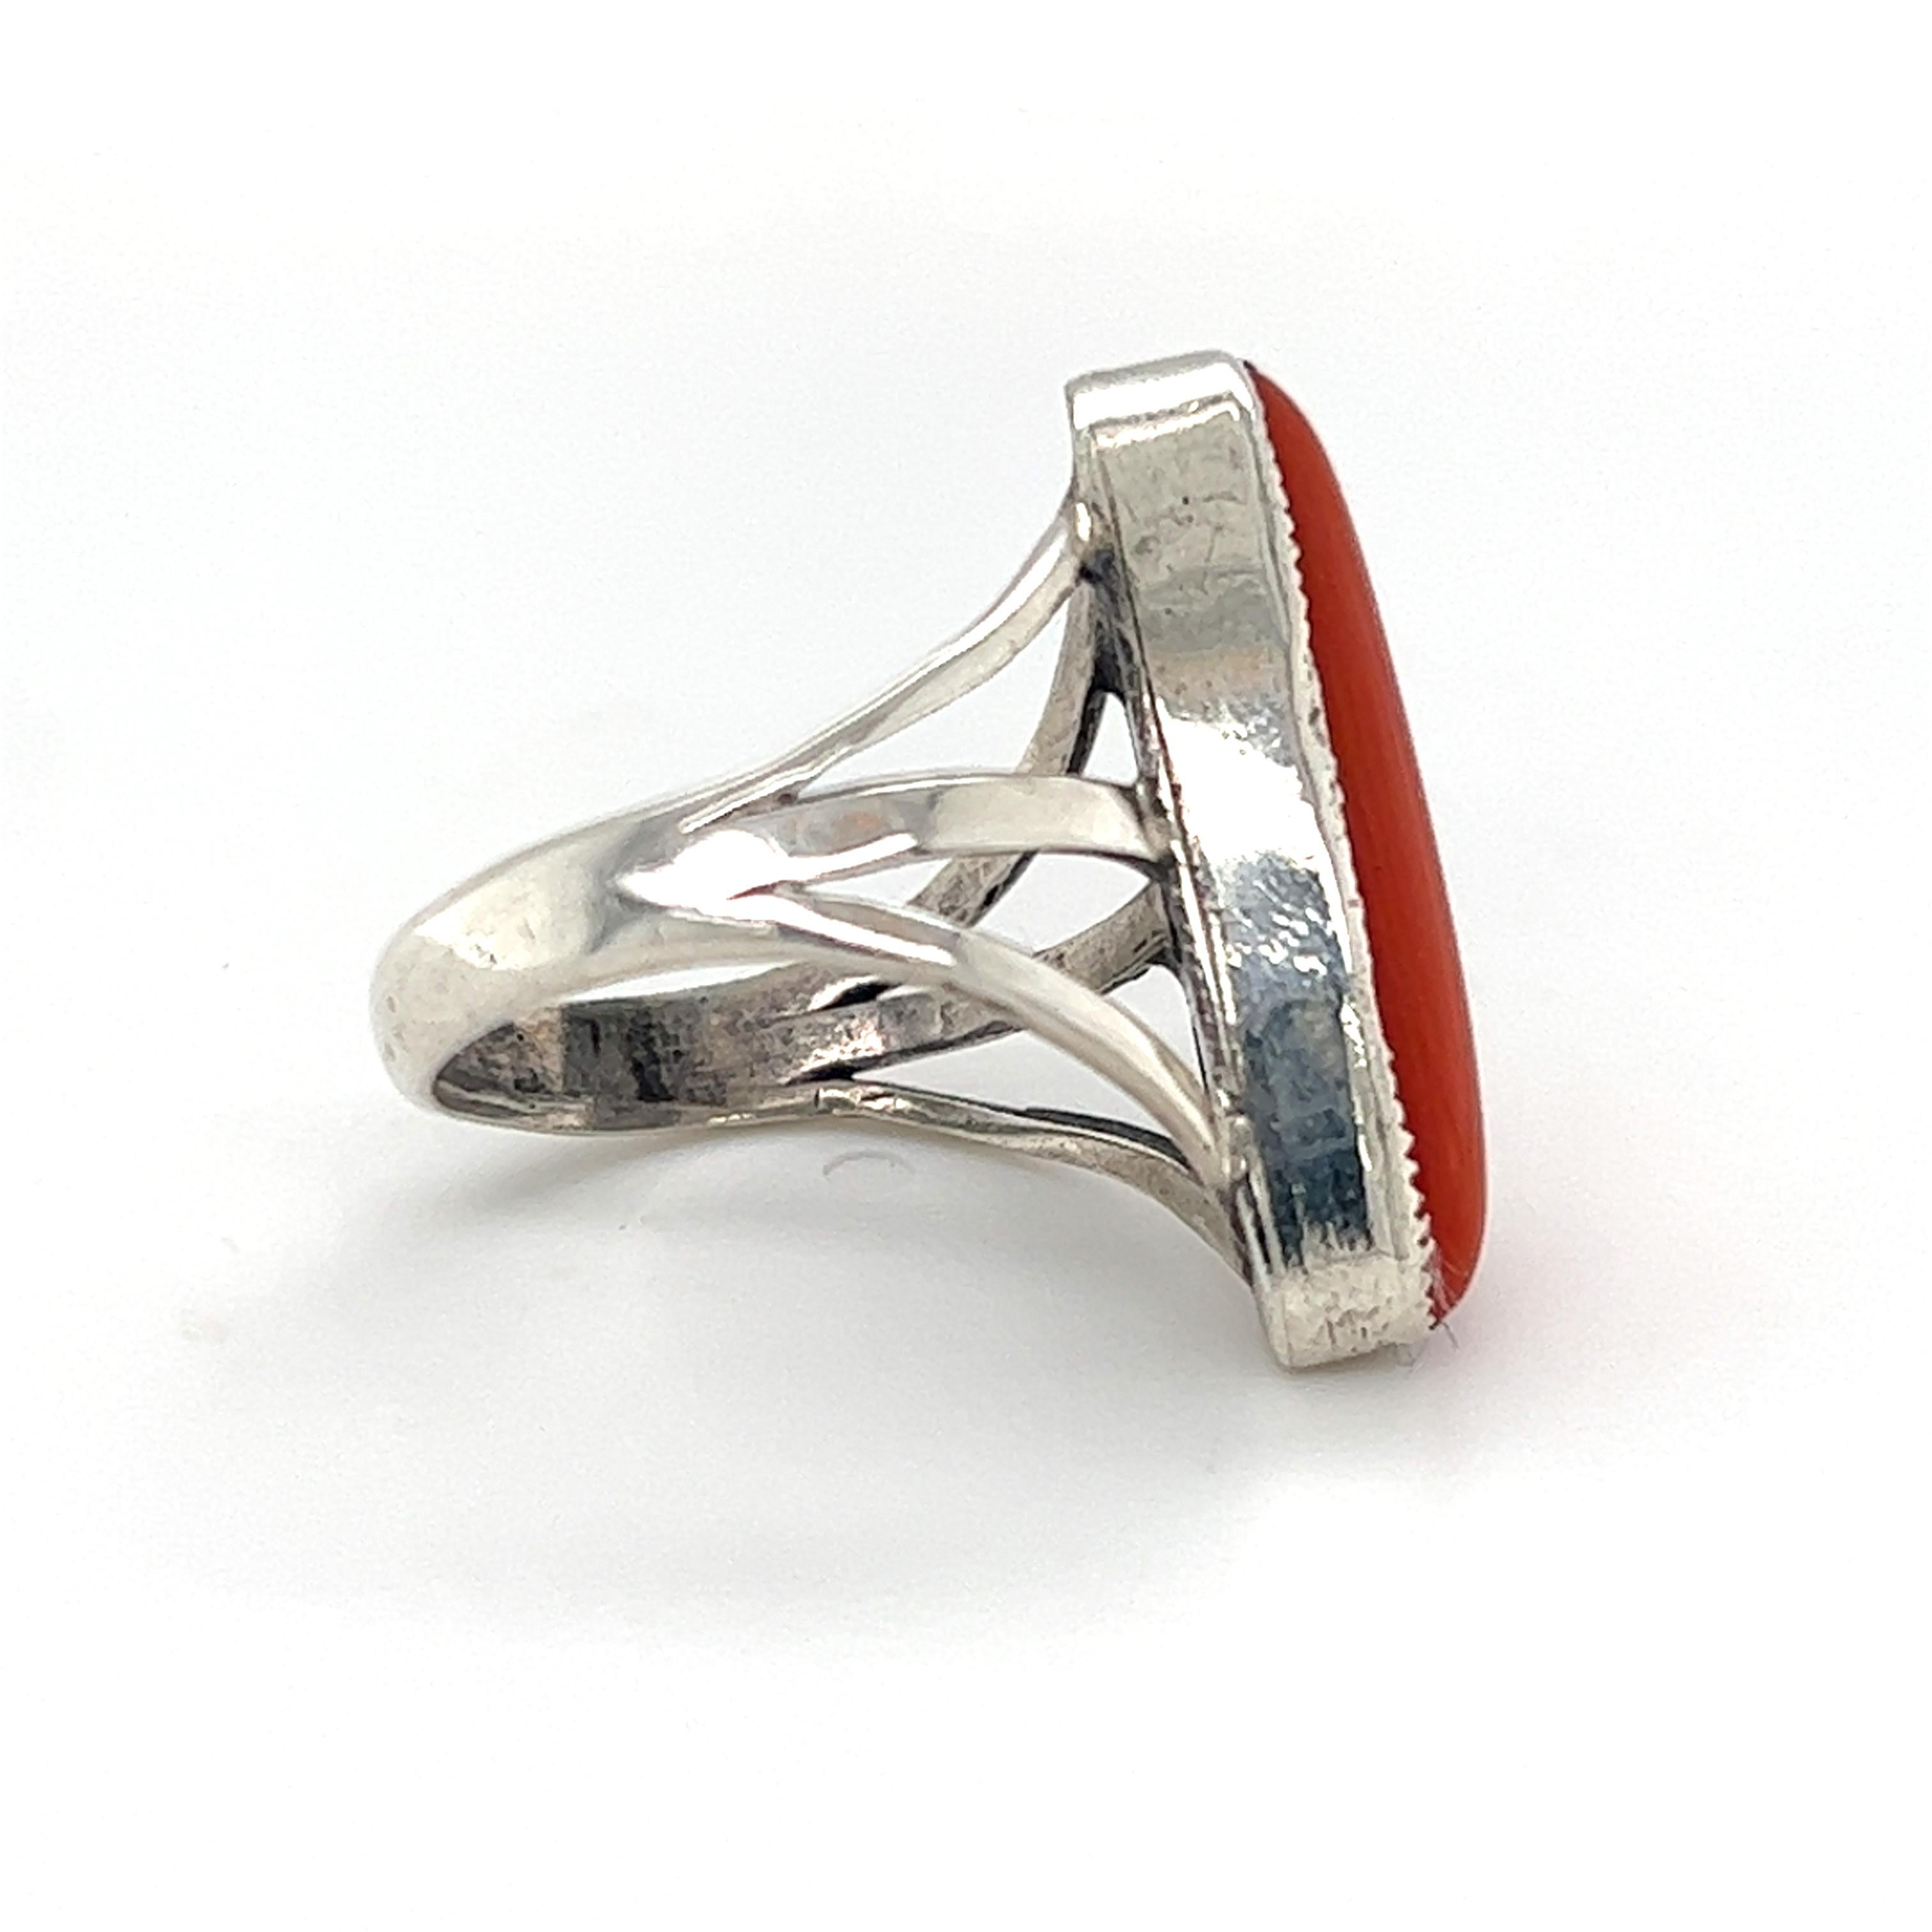 One sterling silver triple split shank design ring set with one 7.35x22.04mm oblong-shaped cabochon coral stone.  The ring measures 22.26mm near the top of the ring and tapers to 3.27mm at the bottom.  The ring is a fingers size 5 and is resizable.  